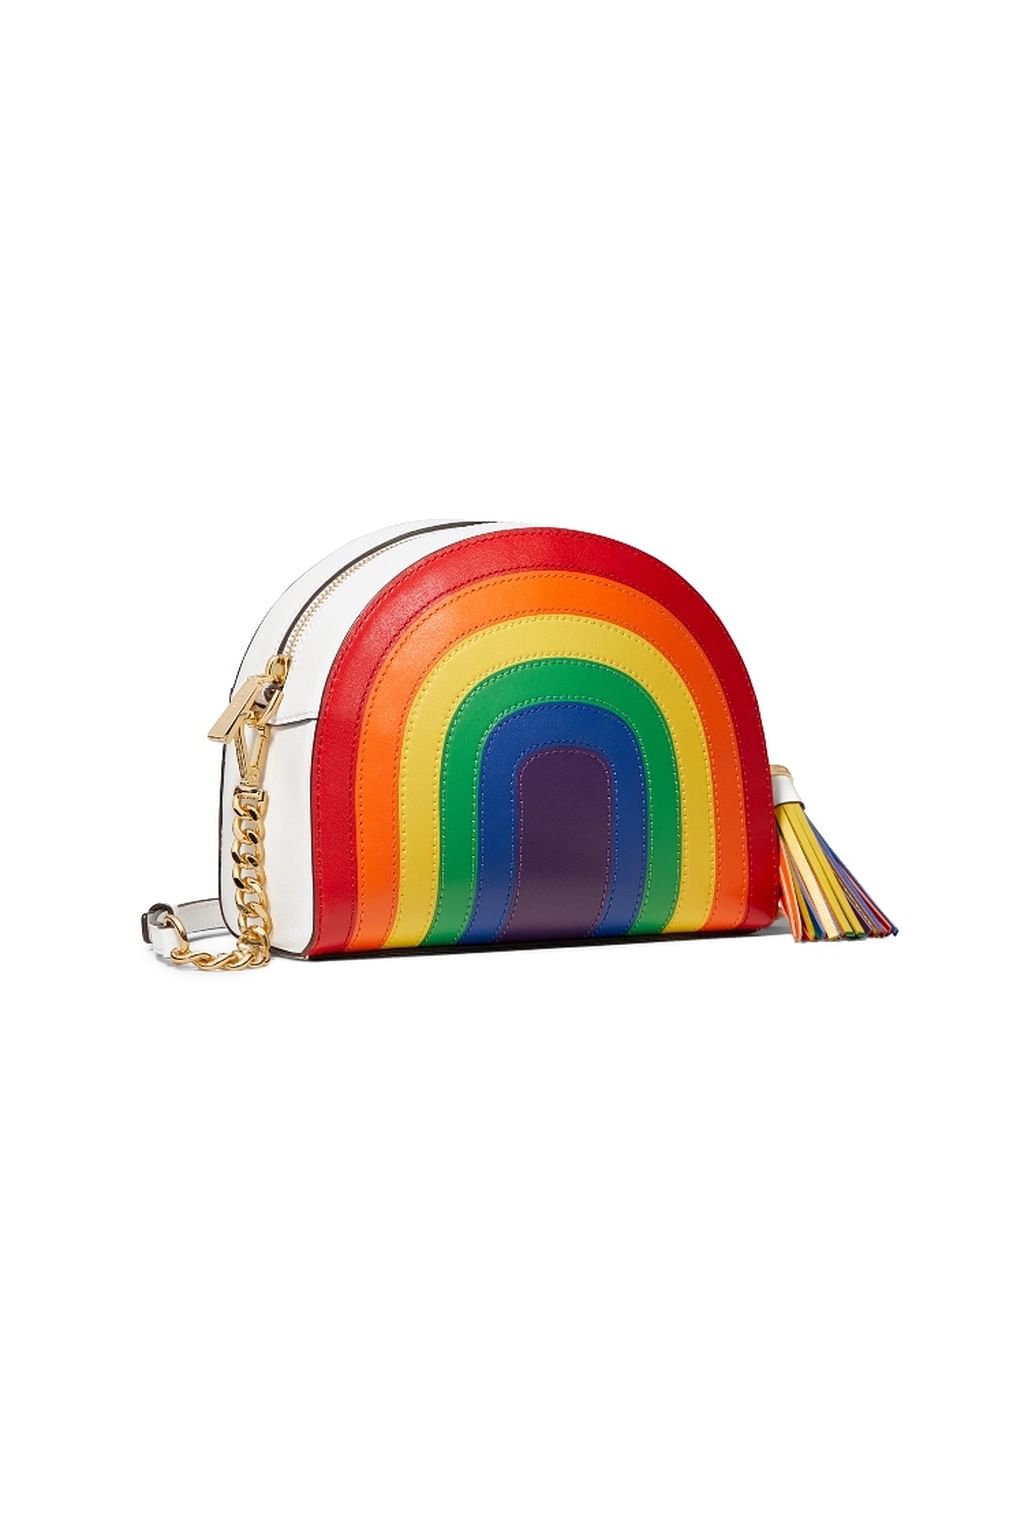 It's Pride Month And Michael Kors Is Bringing Out The Rainbow Gear